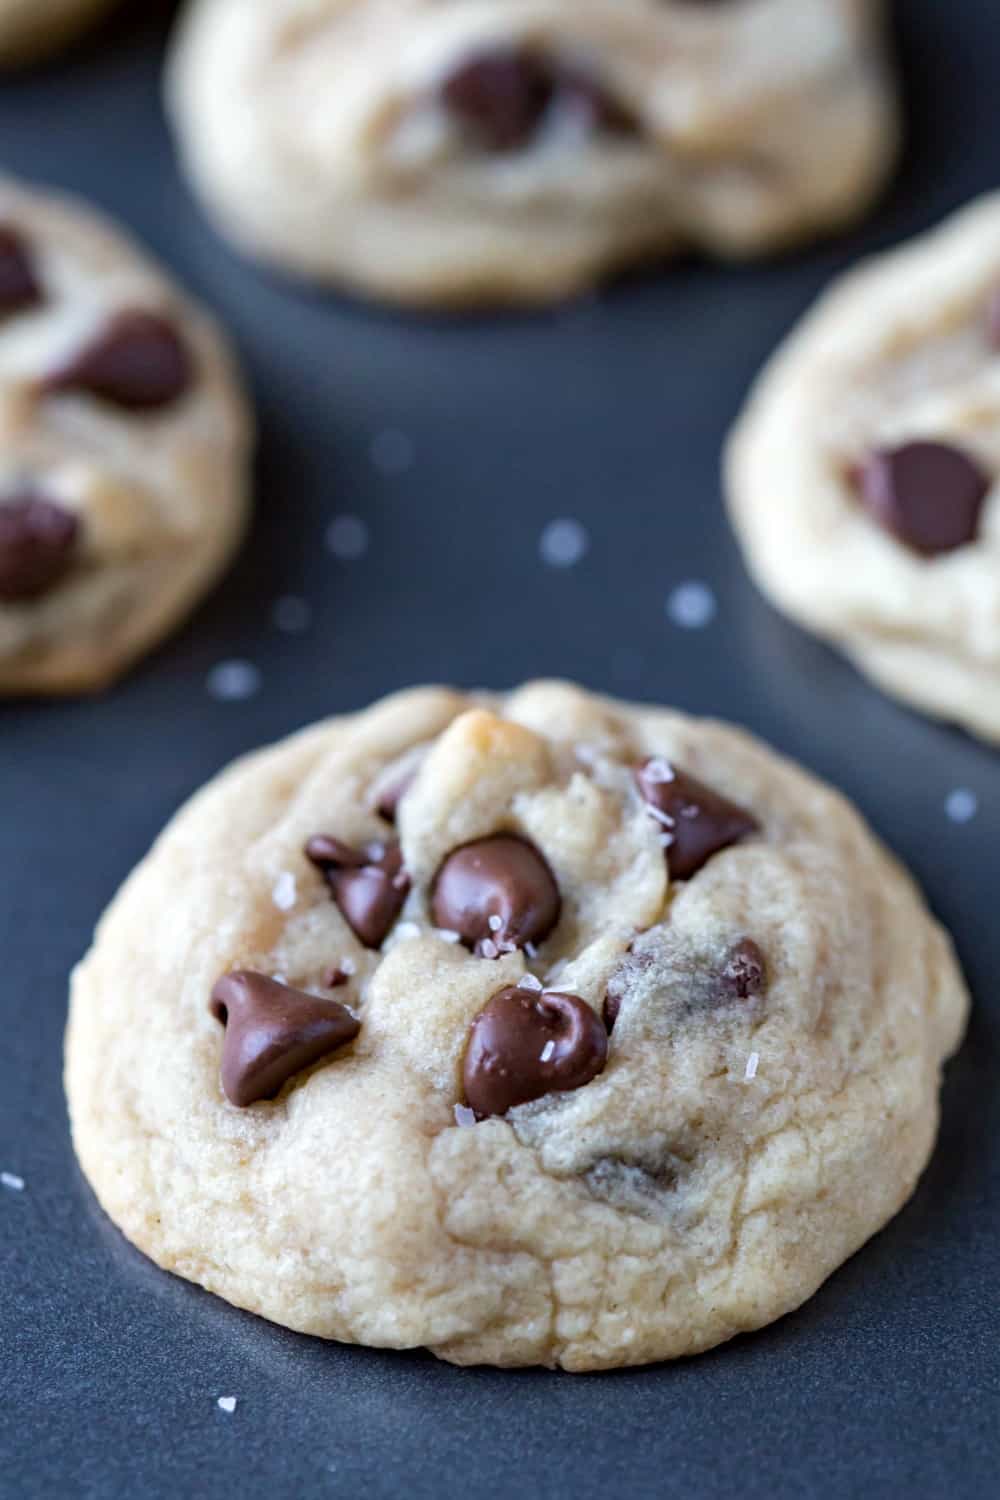 The Best Homemade Chocolate Chip Cookies Recipe